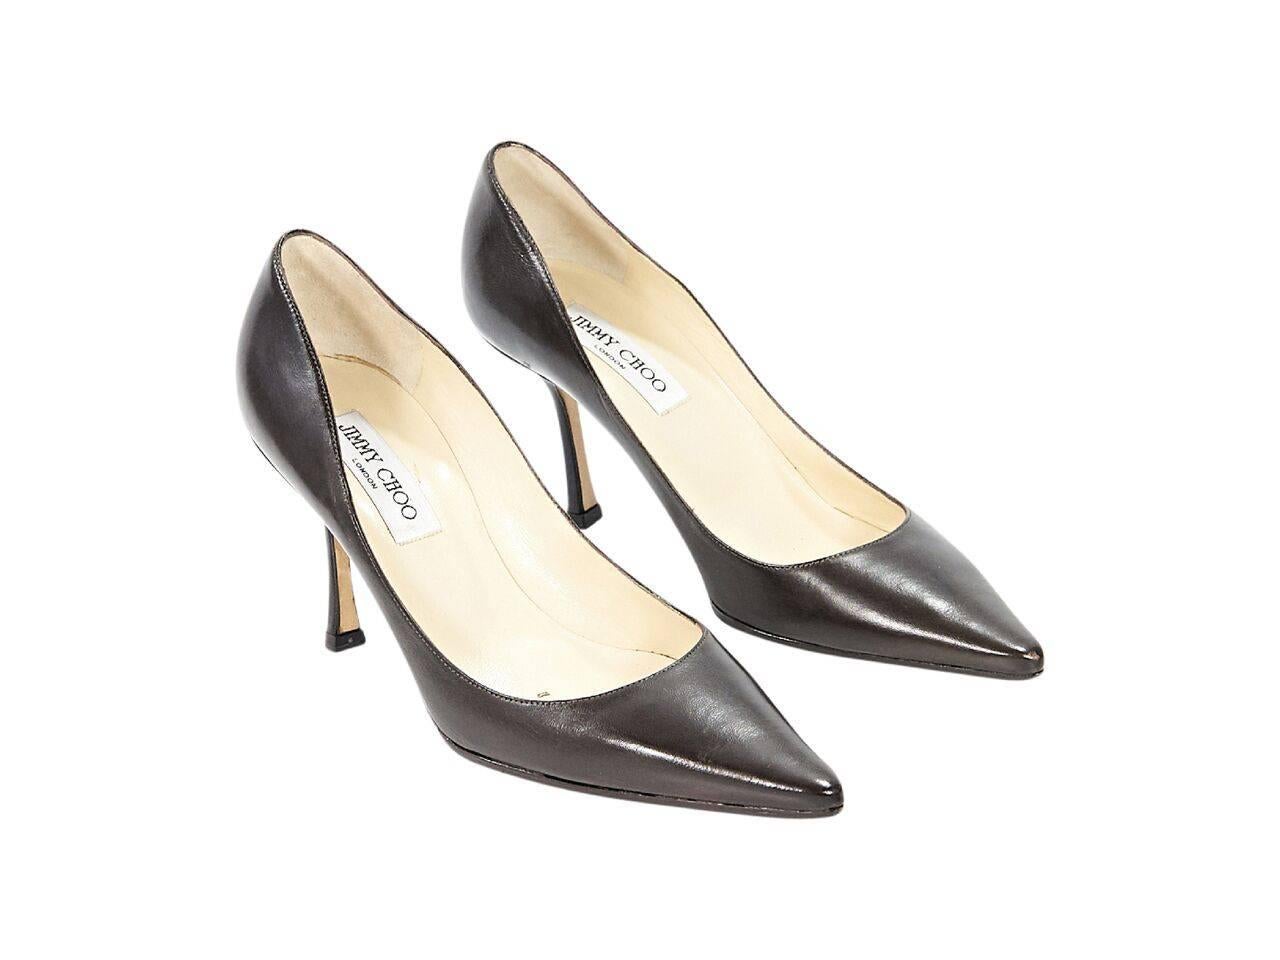 Product details:  Brown leather pumps by Jimmy Choo.  Point toe.  Slip-on style.  
Condition: Pre-owned. Very good.
Est. Retail $ 398.00